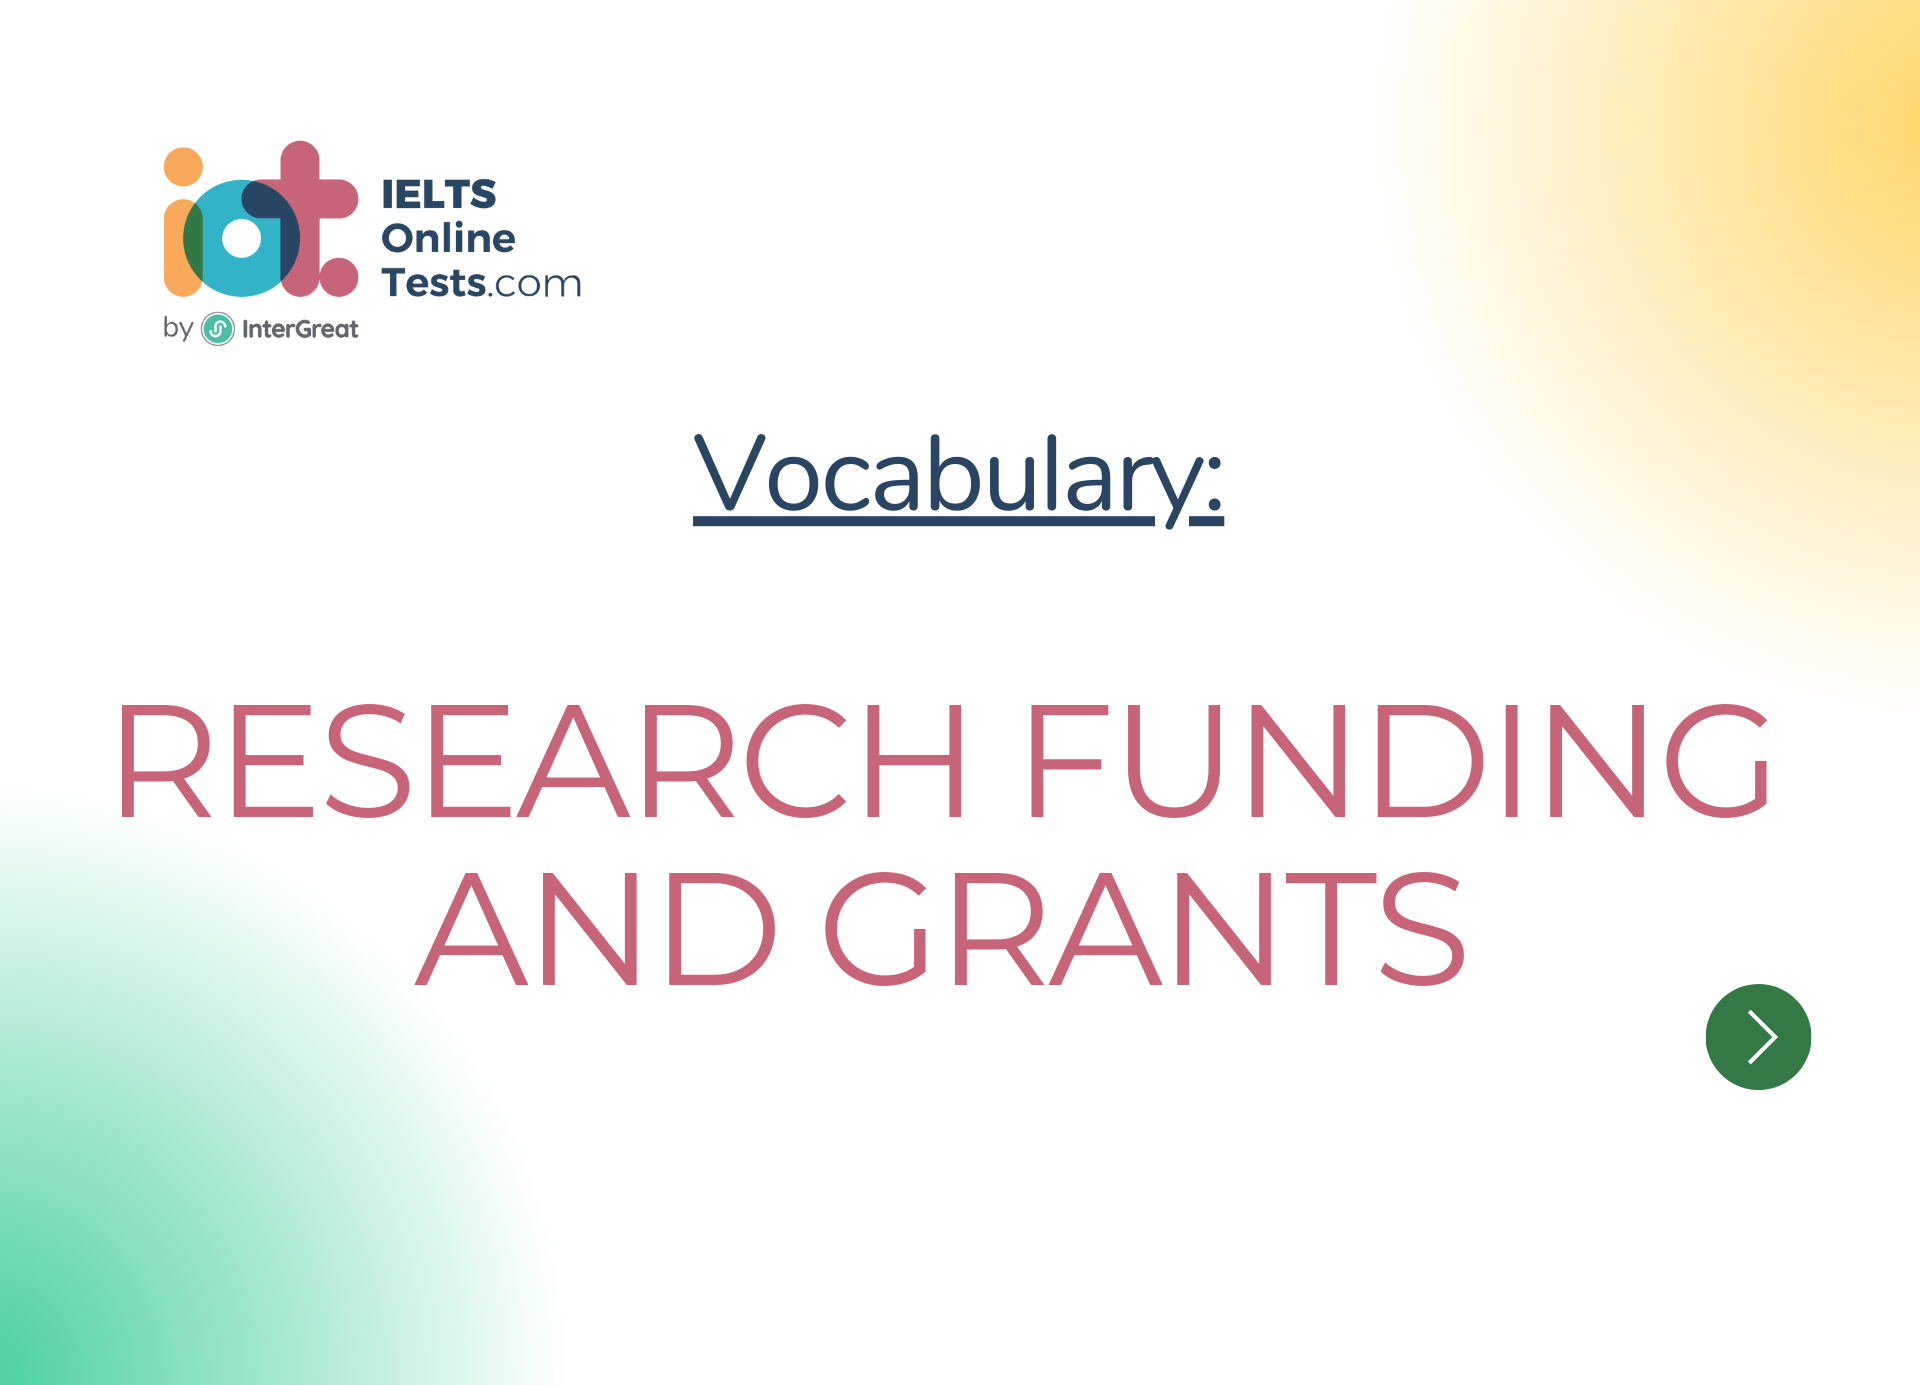 Research funding and grants